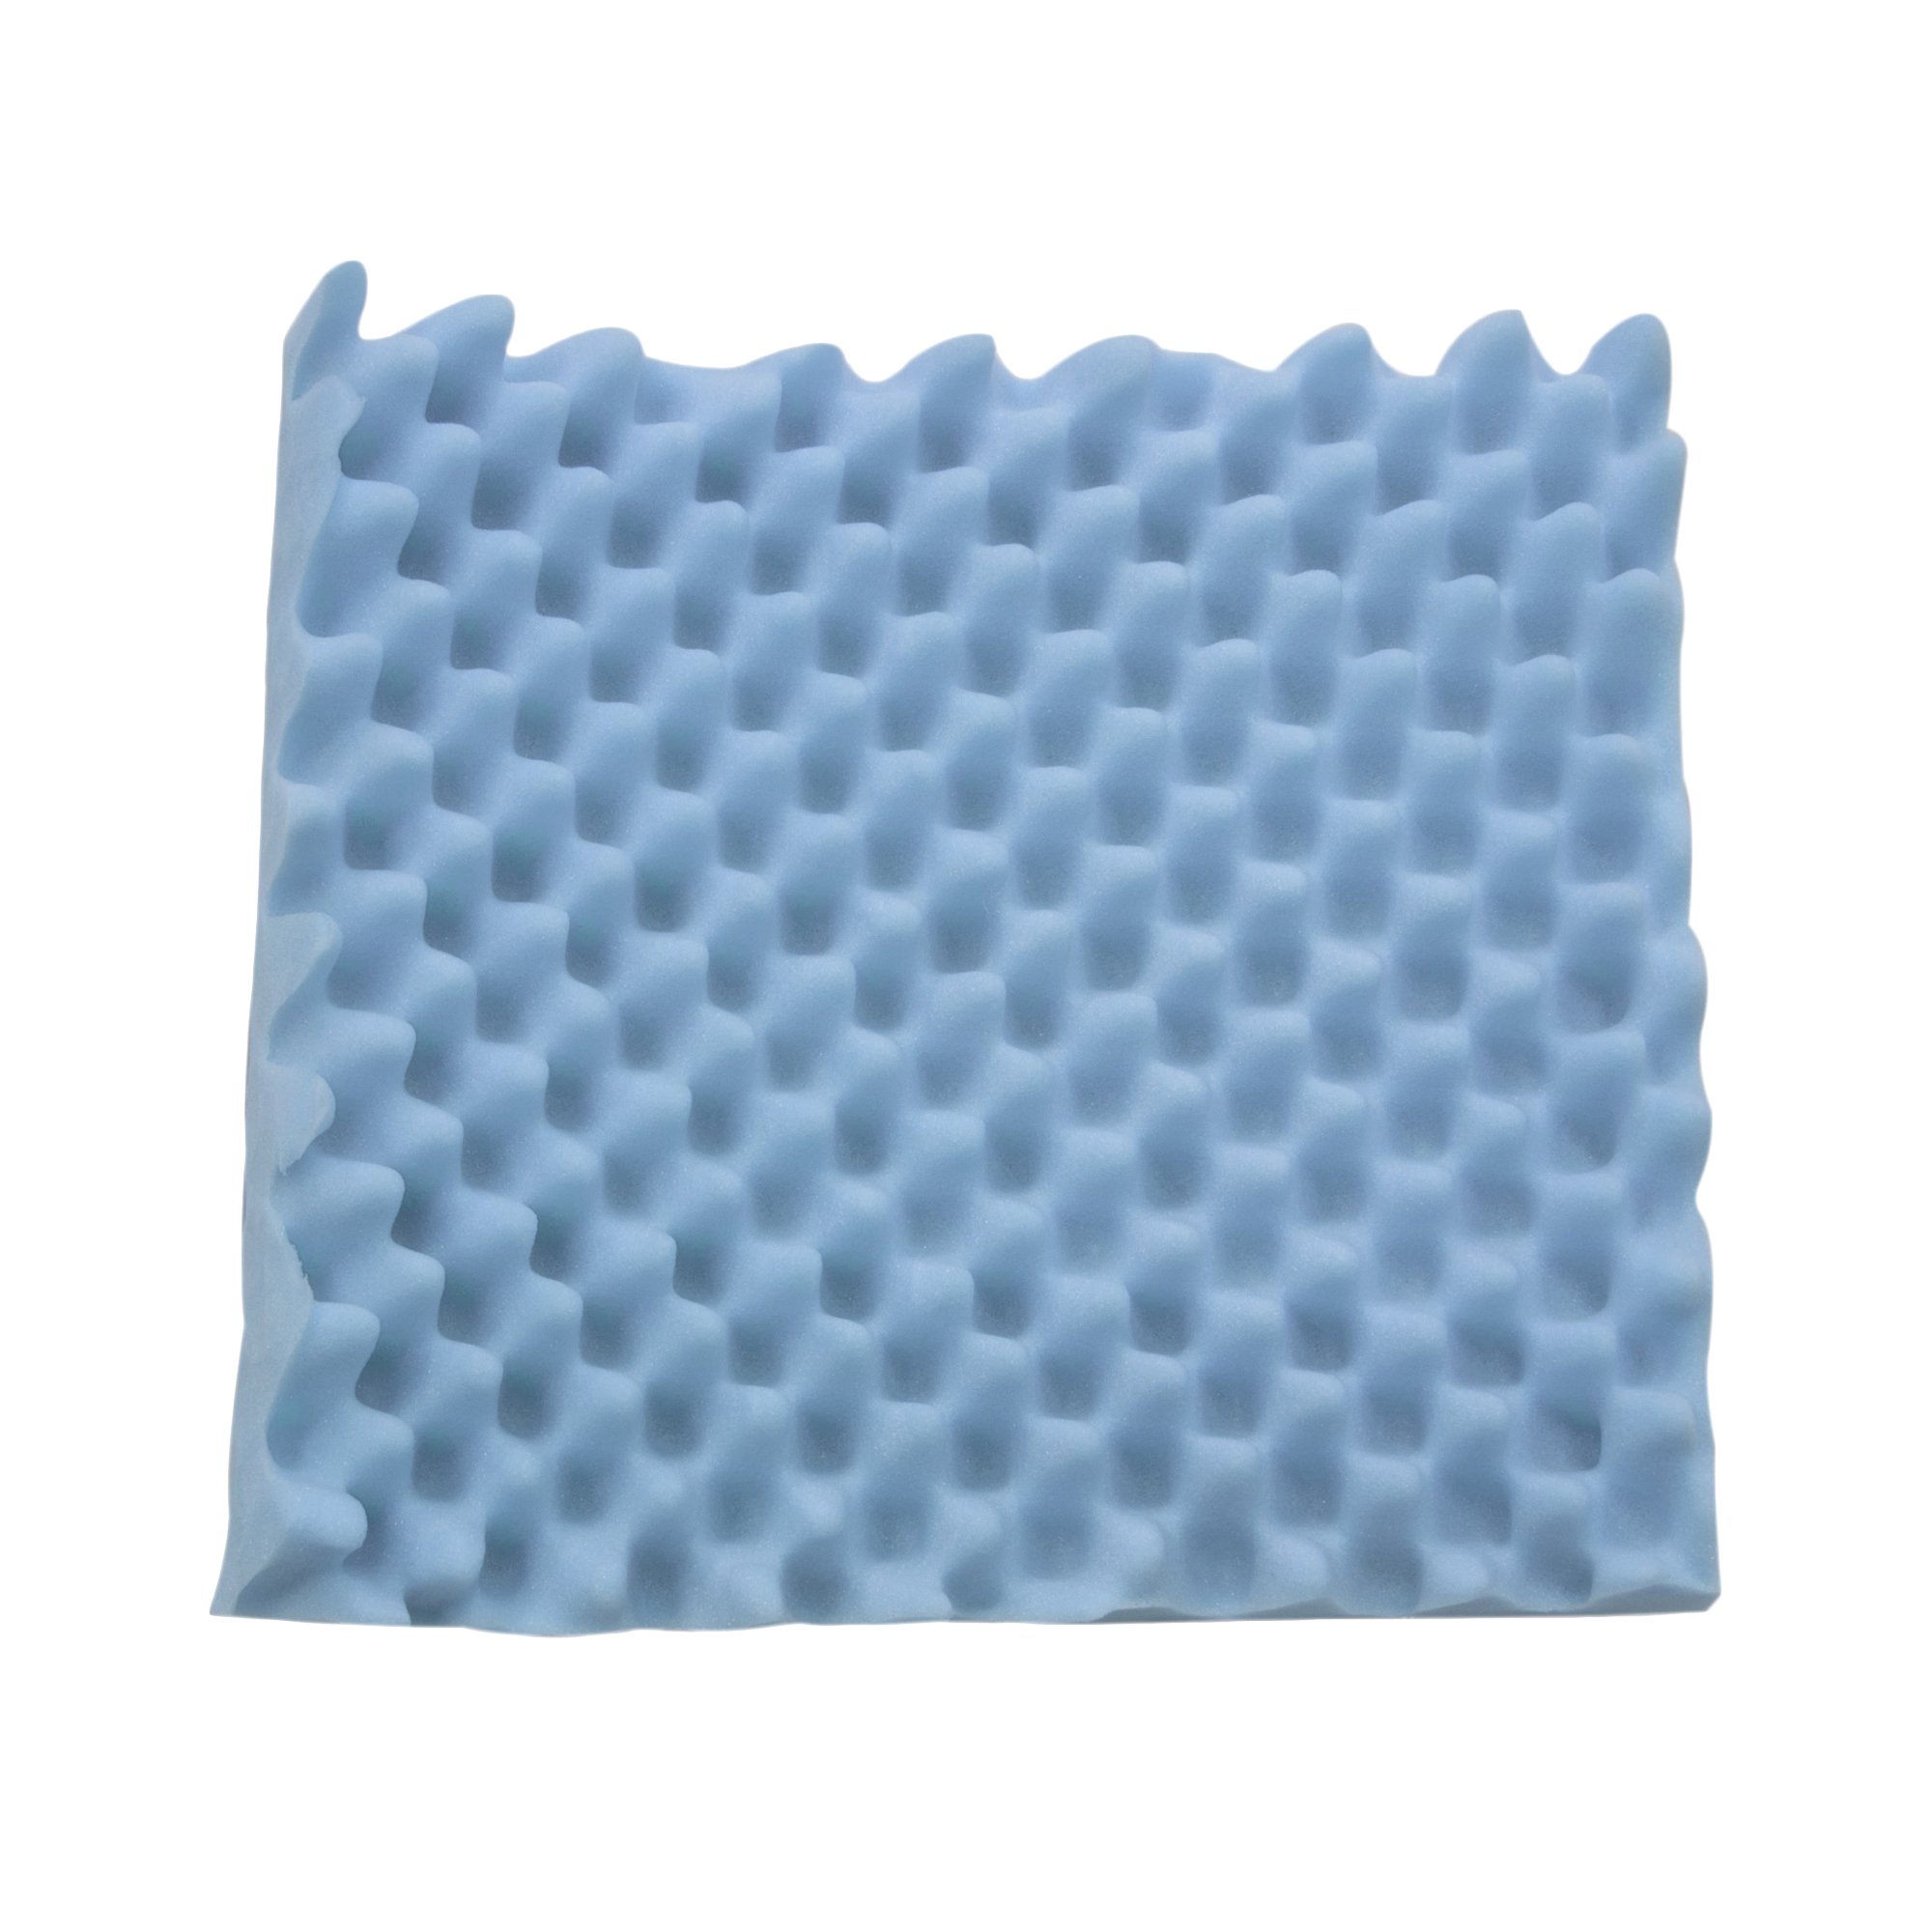 Gel E Seat Cushion - Foam, Nylon/Vinyl Cover, Great for Wheelchairs - 18 in  x 16 in x 3 in - Simply Medical